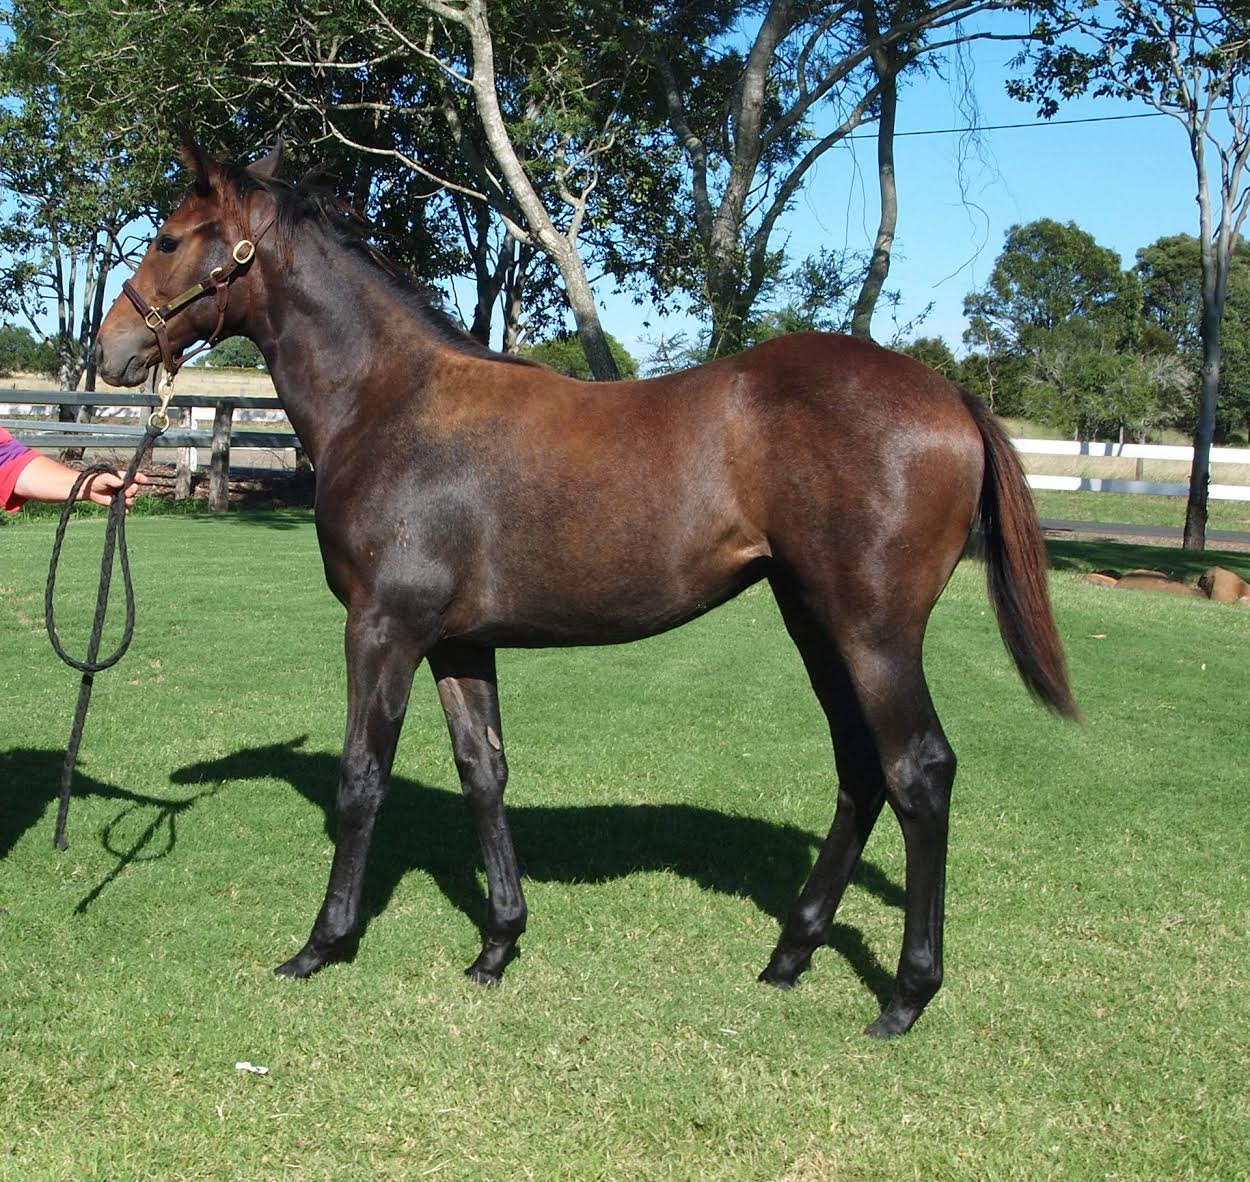 Top Echelon – SALE EVE weanling filly 